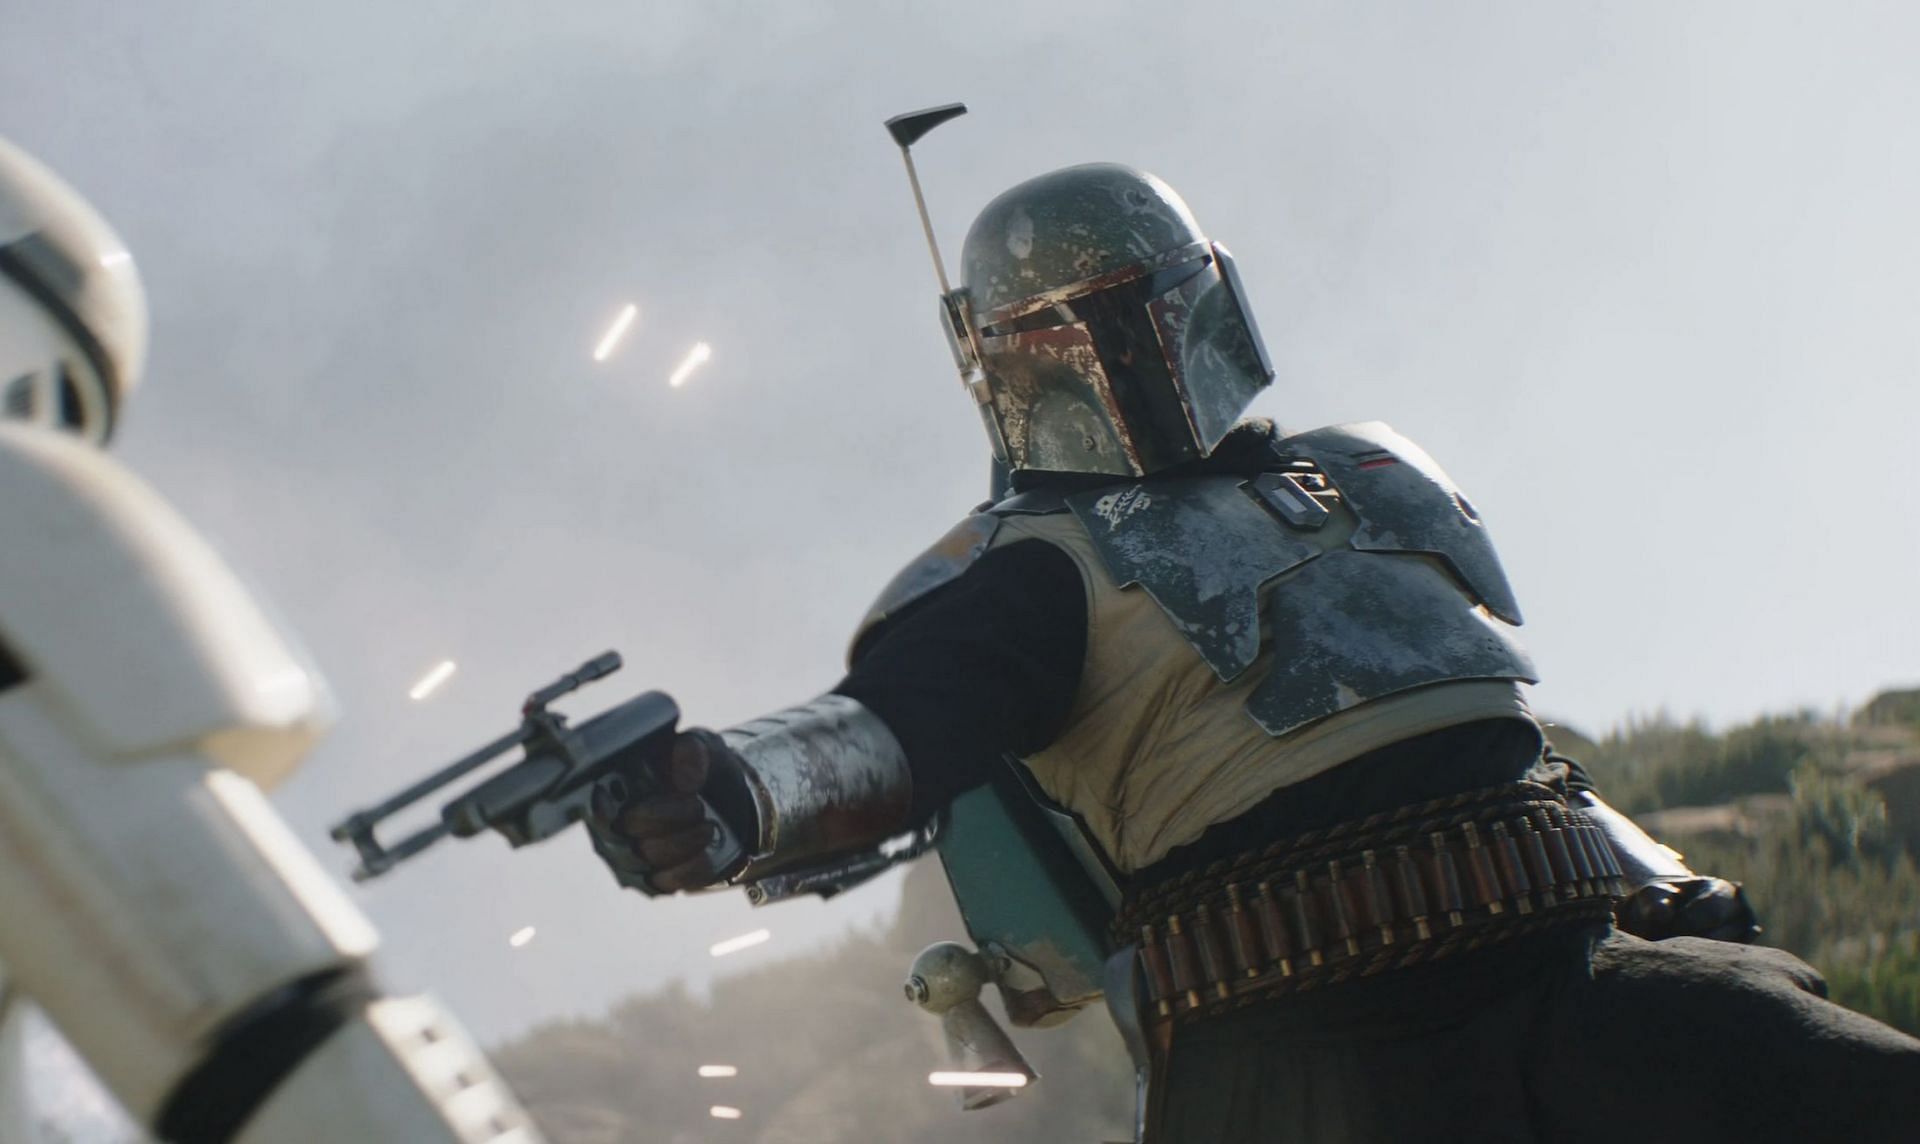 Boba Fett&#039;s popularity with fans has led to his expanded role in the Star Wars canon (Image via Lucasfilm)